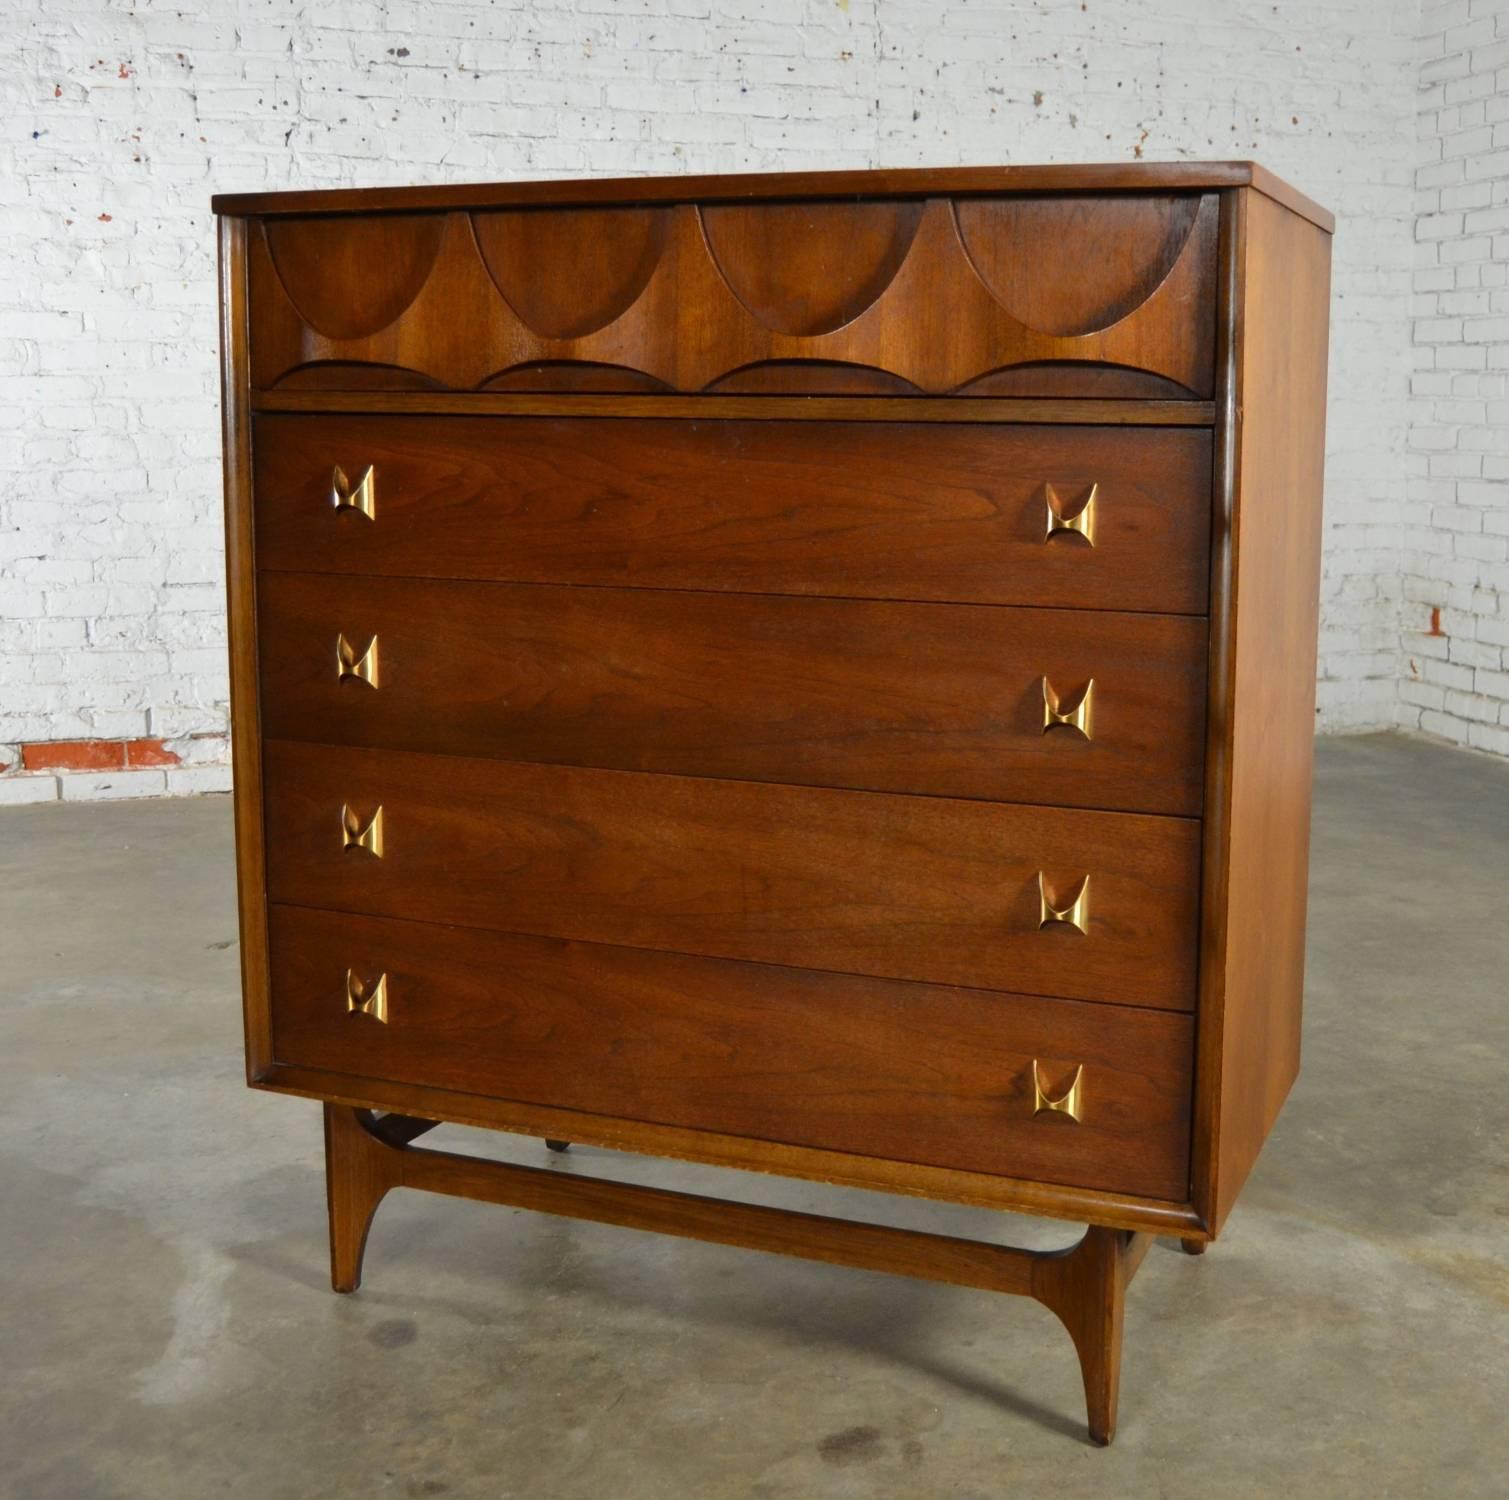 Fabulous Mid-Century Modern 6130-40 walnut chest of drawers from the Brasilia collection by Broyhill Premier. This chest is in absolutely wonderful condition with its original finish and only small nicks & dings as you would expect for its